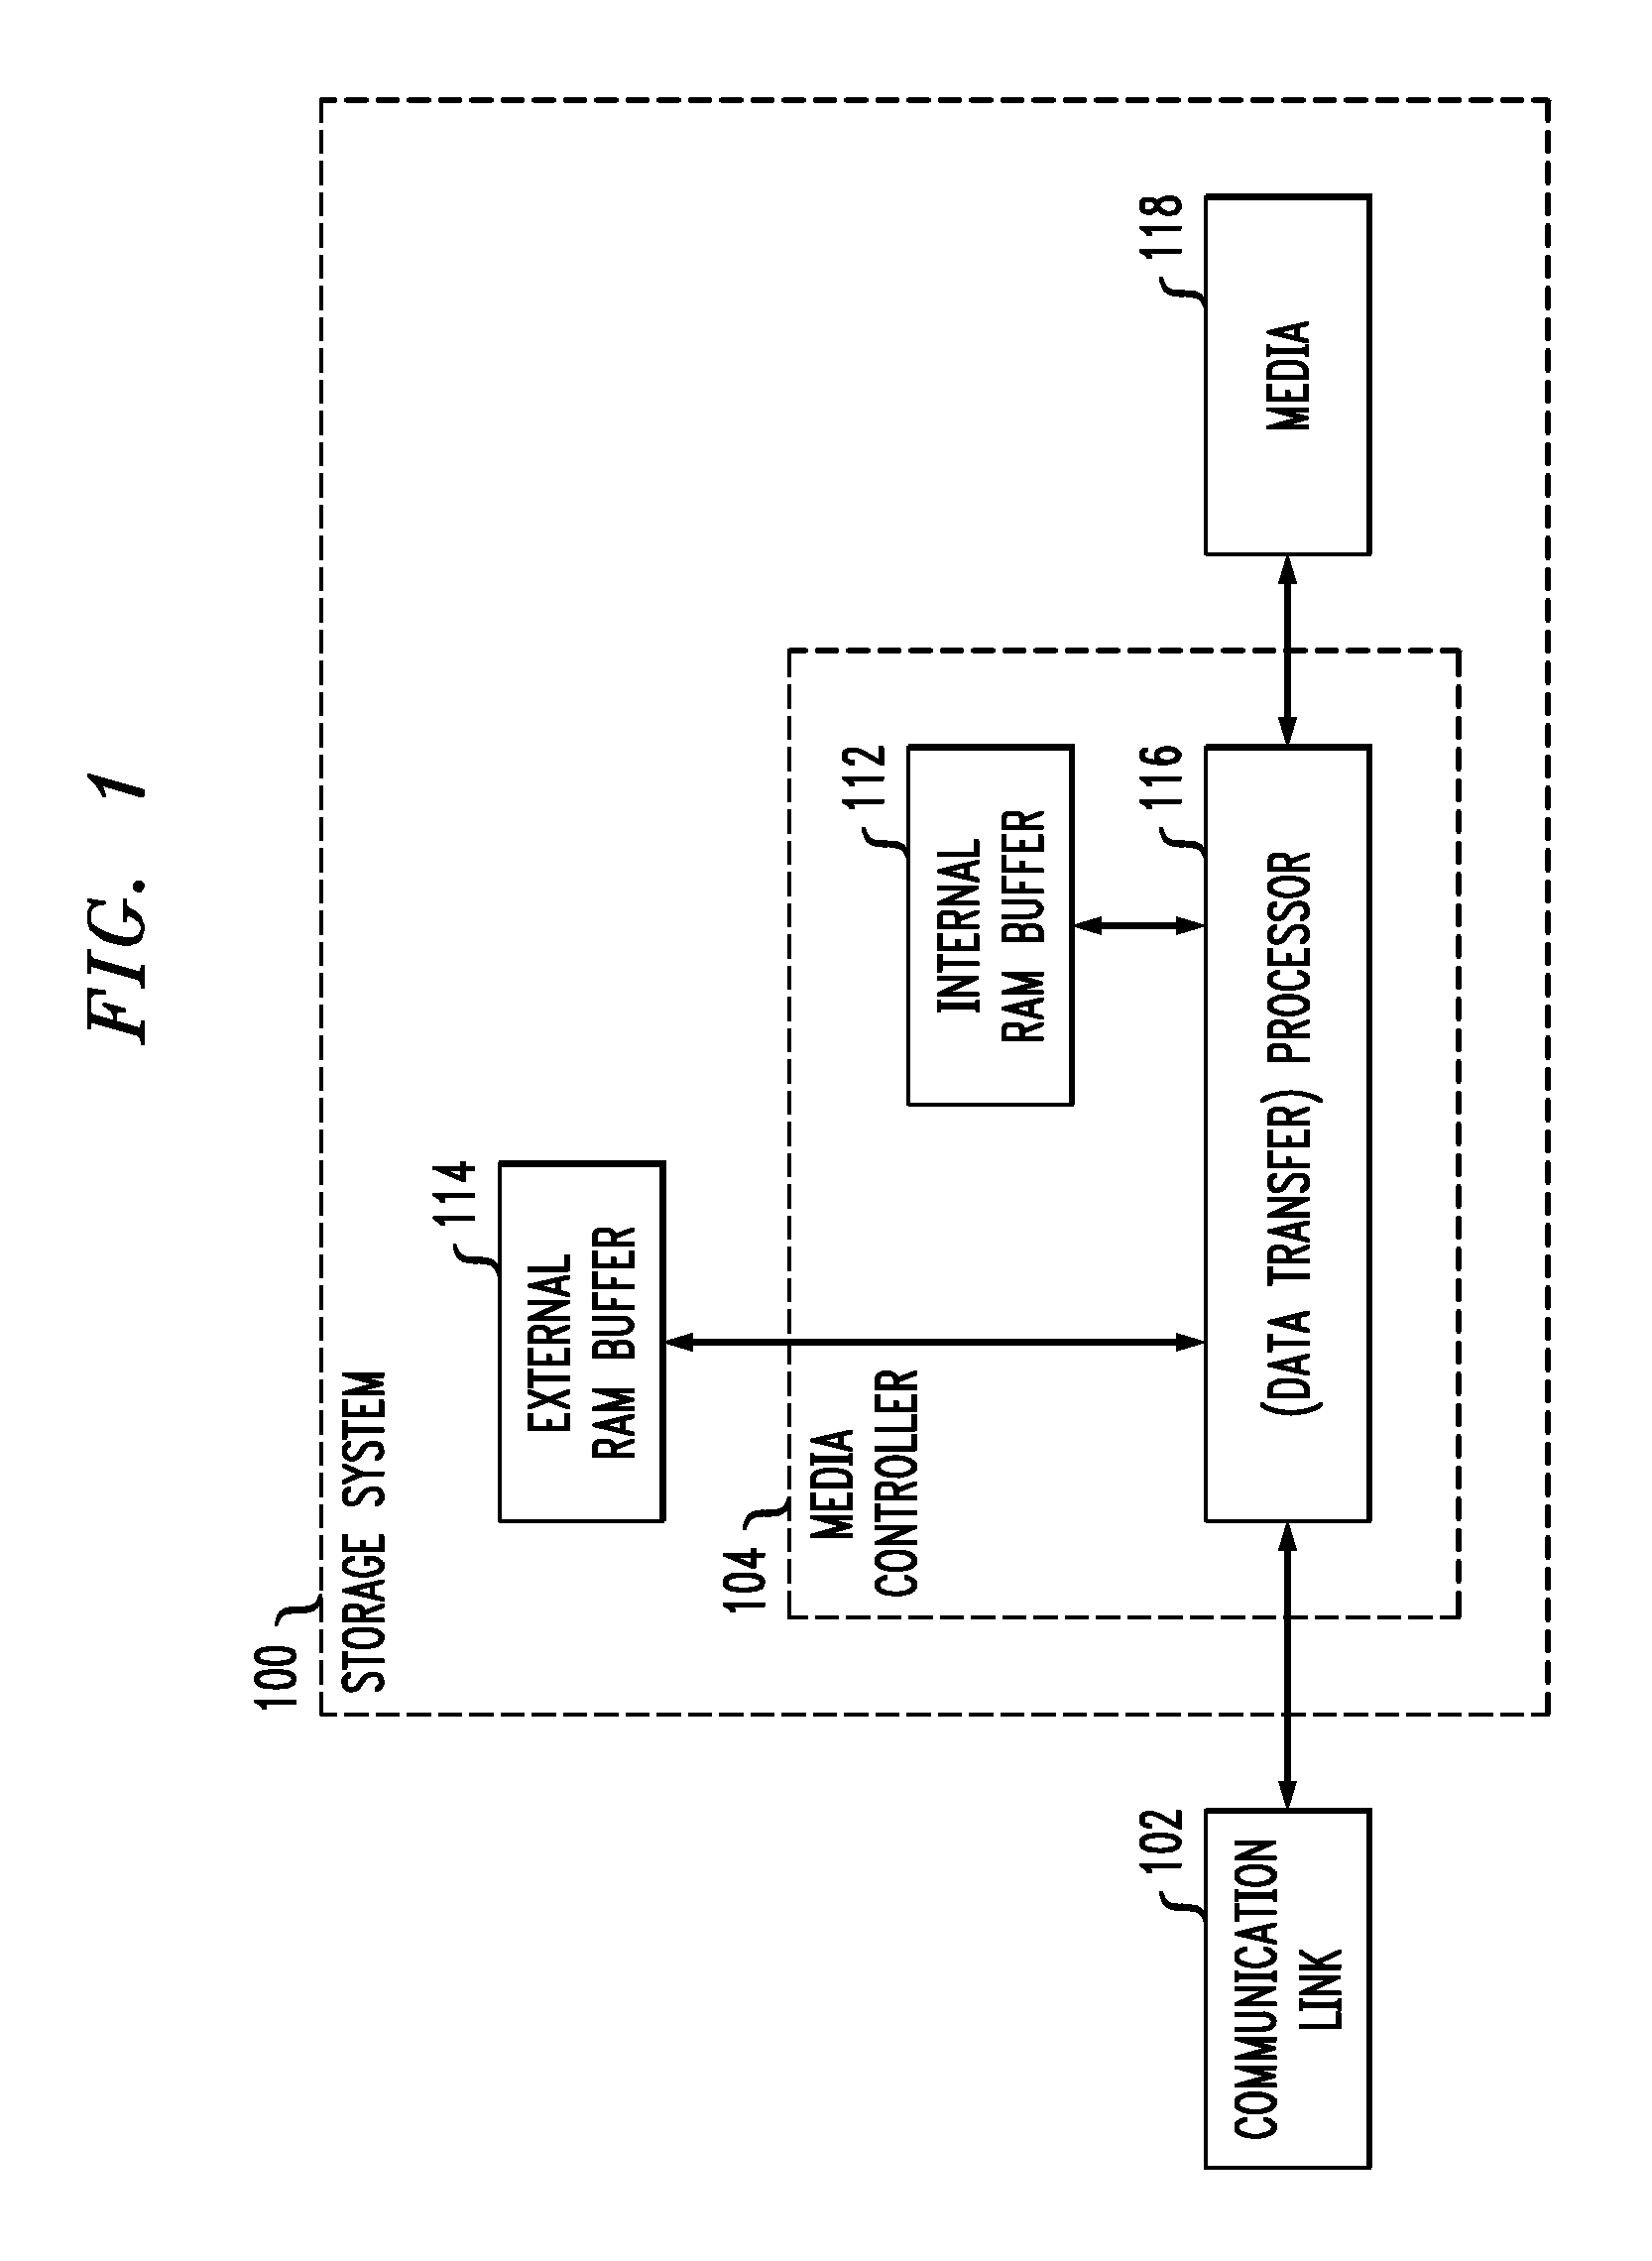 Processing Diagnostic Requests for Direct Block Access Storage Devices